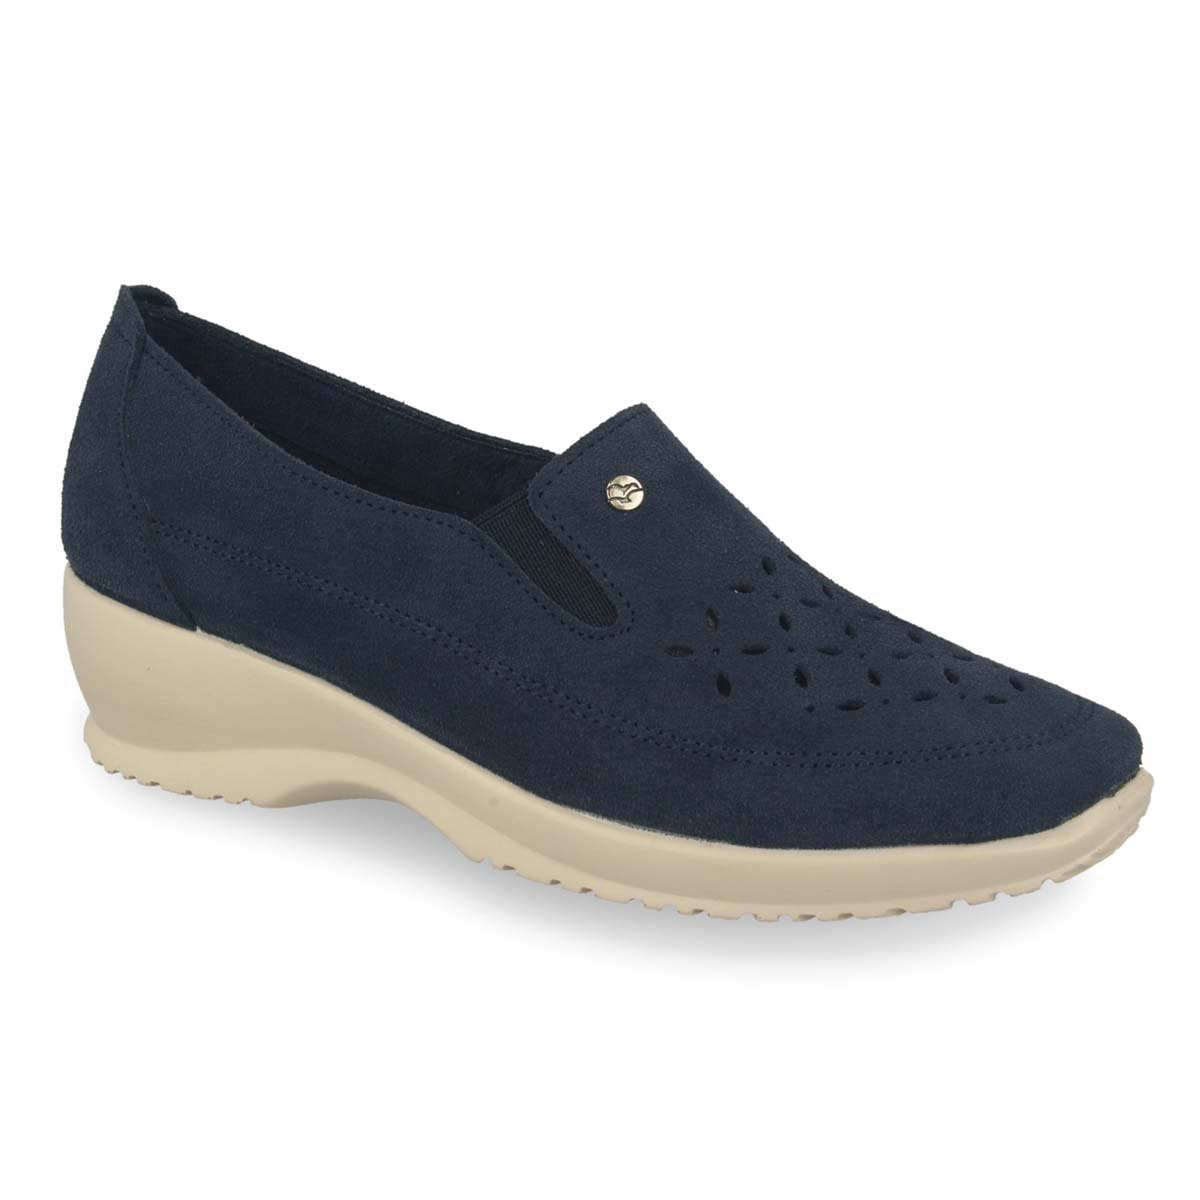 See the Black Leather Slip-On Women Shoes in the colour BLACK, available in various sizes